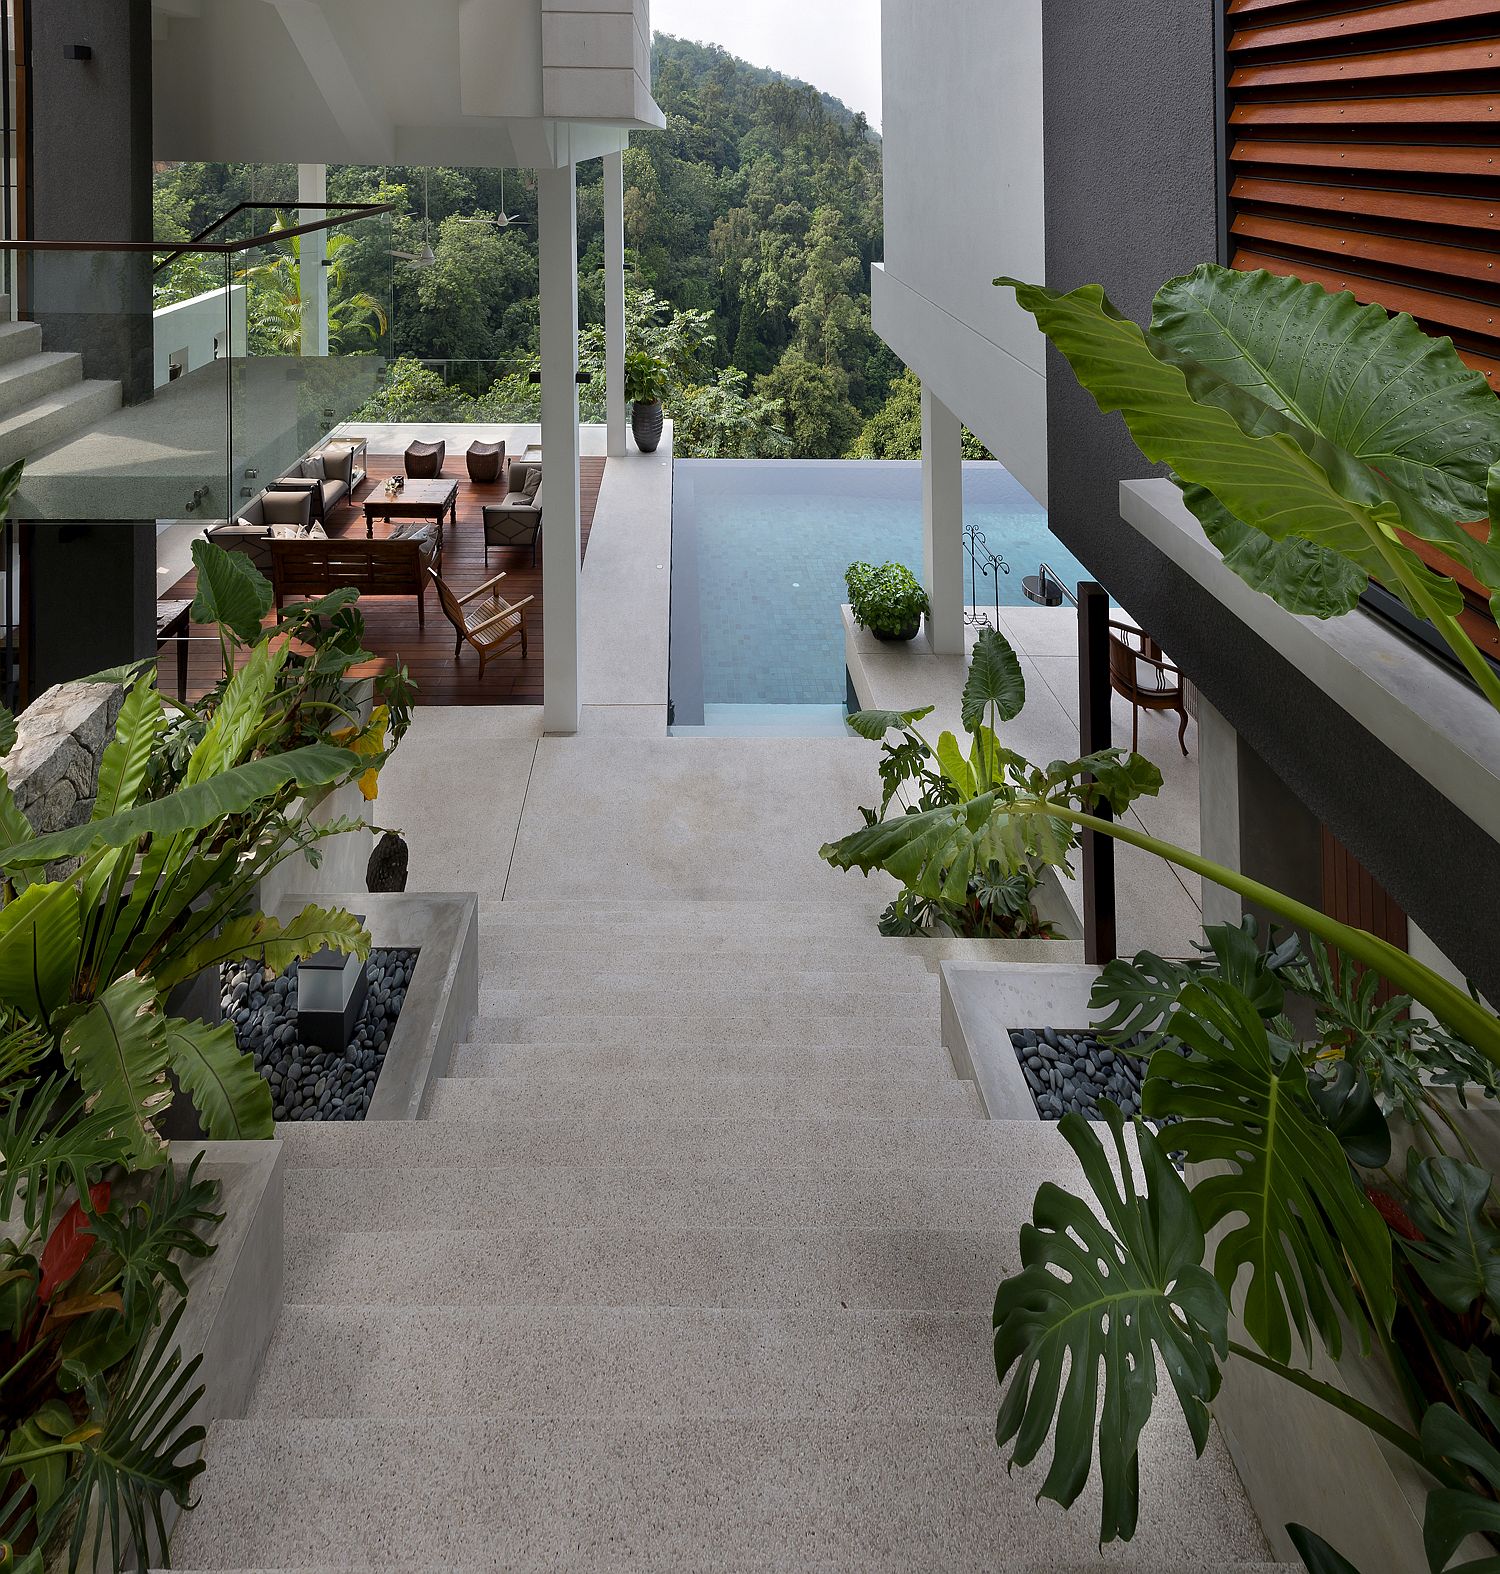 Stairway leading to the pool area